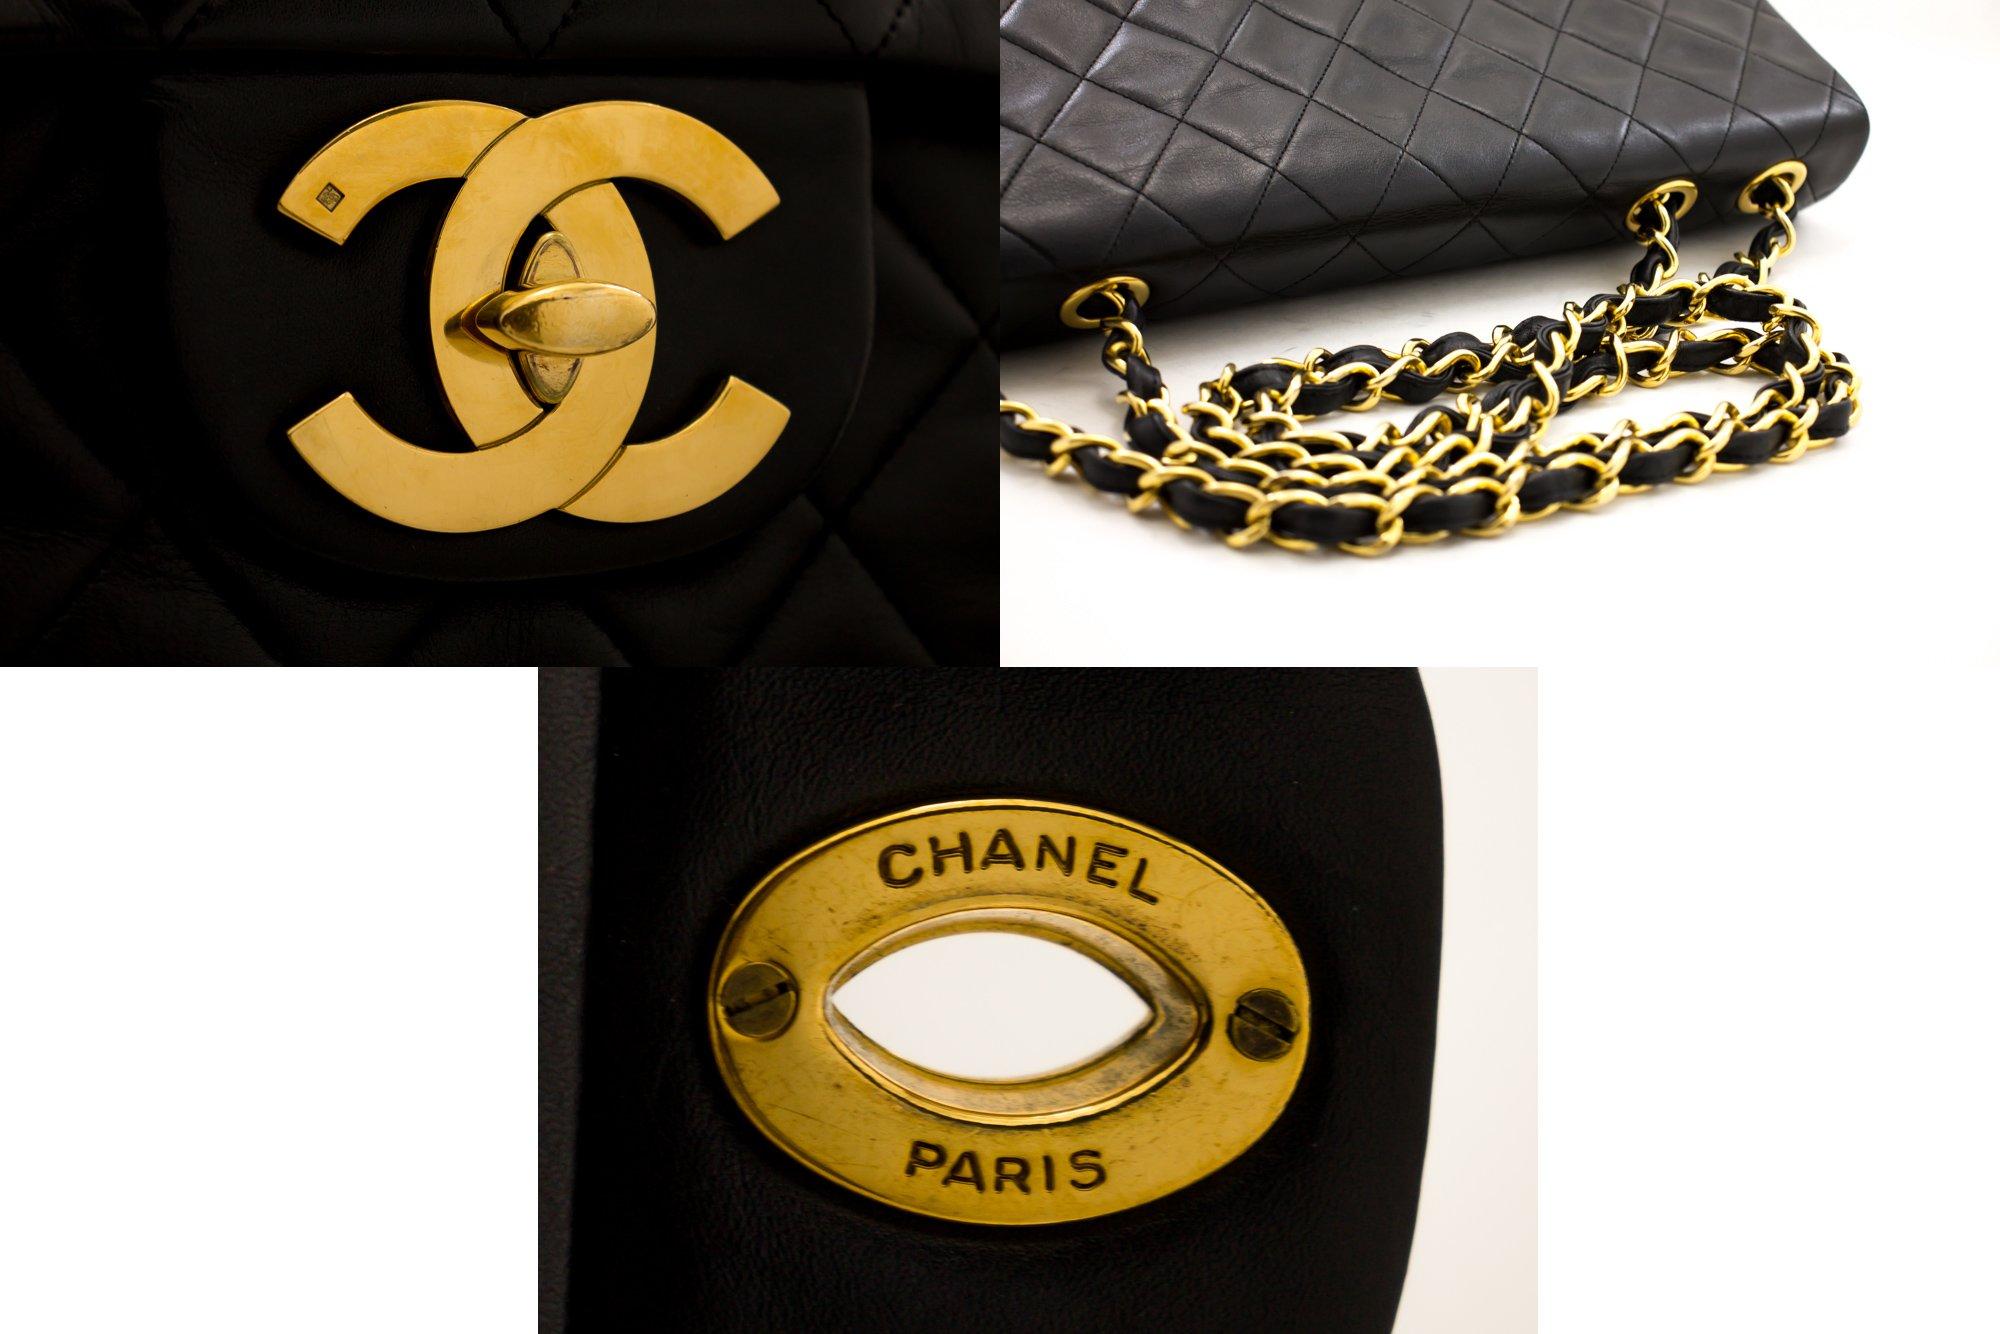 Chanel Maxi Flap Shoulder Bag  In Excellent Condition For Sale In London, GB